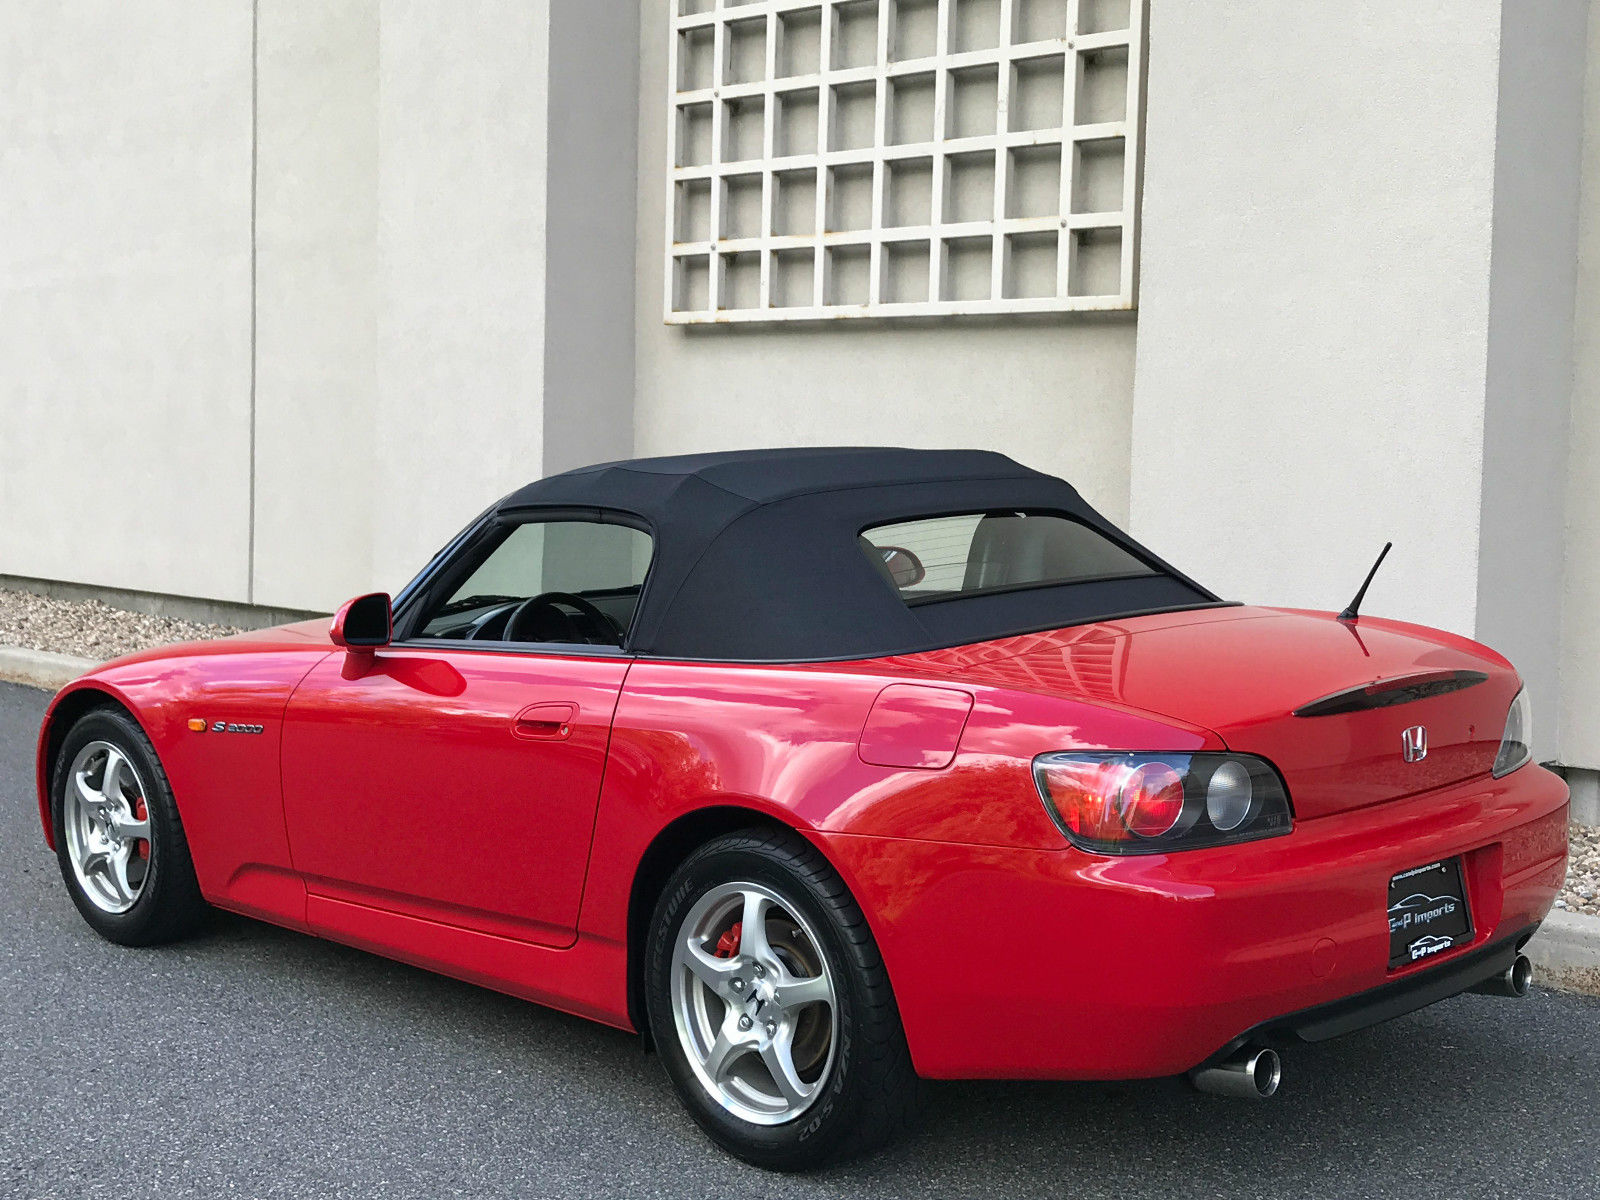 2002 Honda S2000 A Dream Buy With Just 496 Miles Carscoops